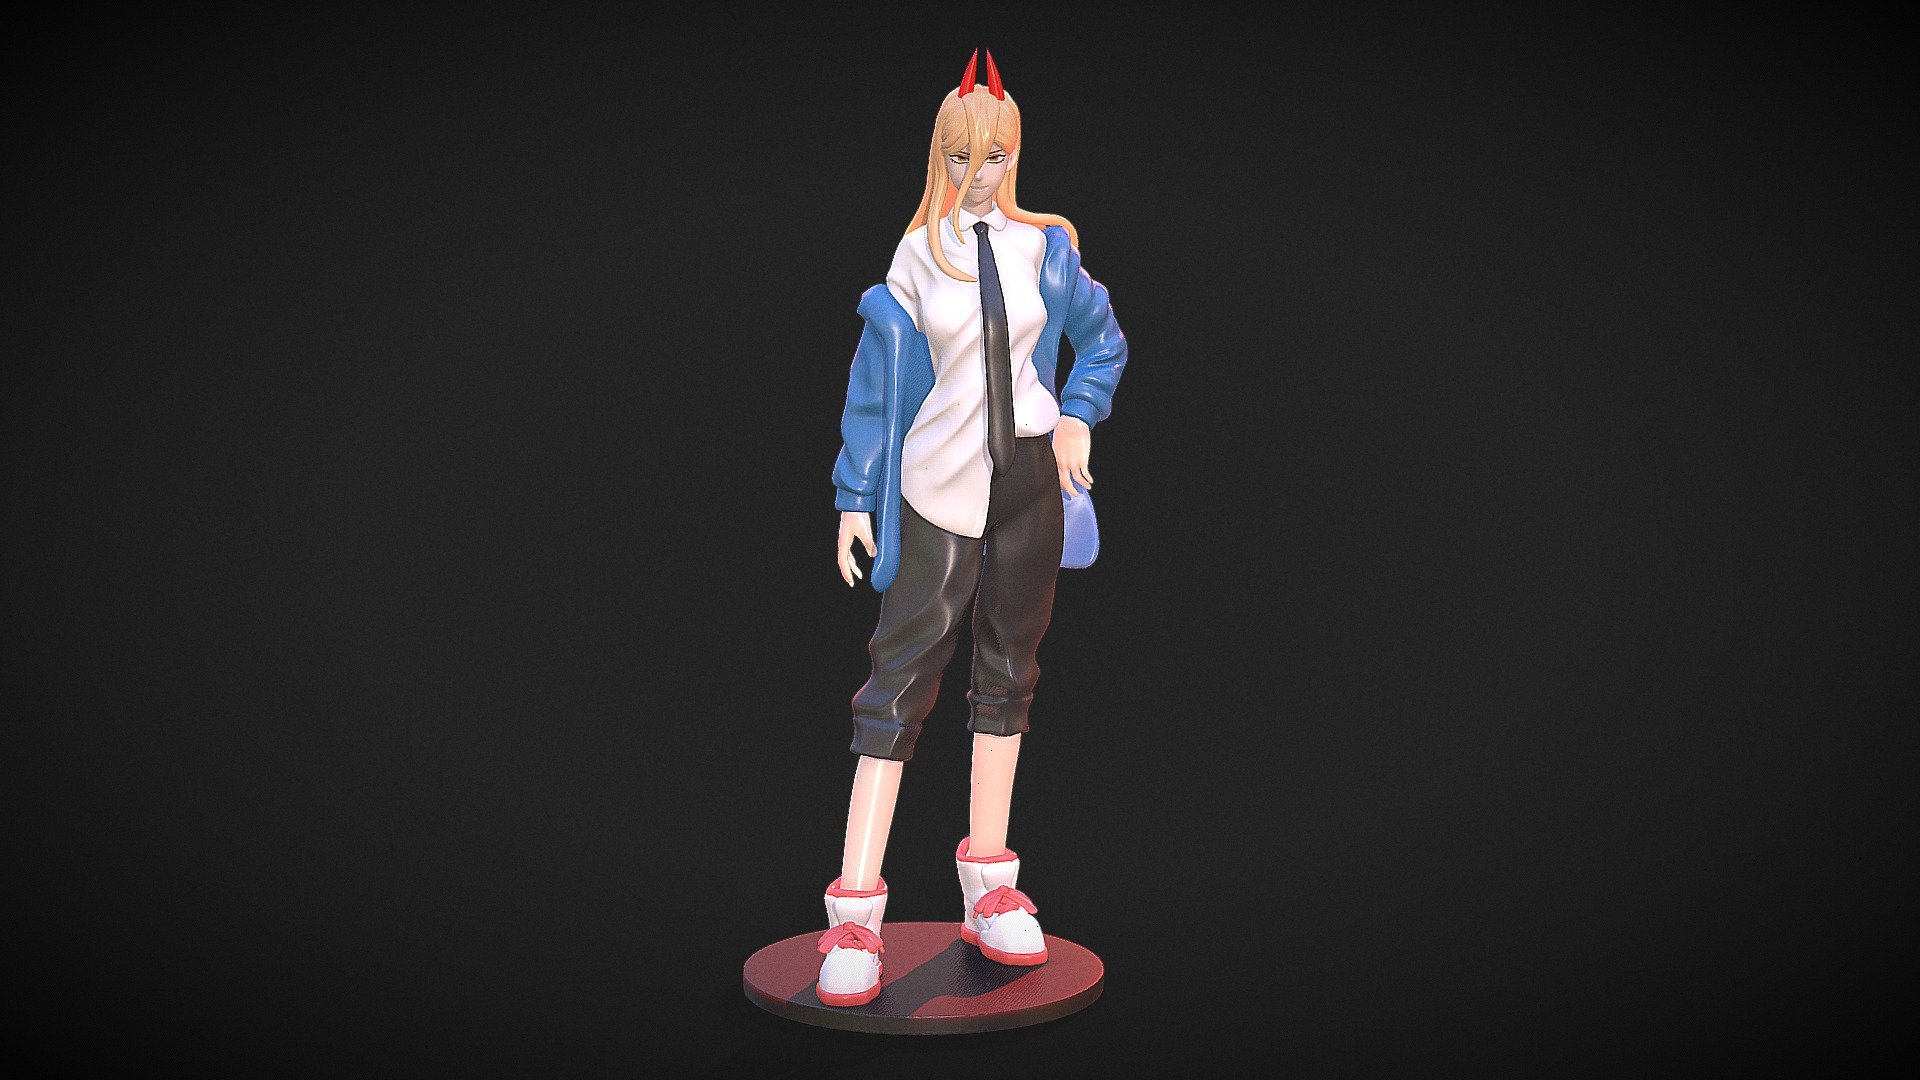 Power from the anime Chainsawman.
I have to improve the head (Hair, Face, etc) - Chainsaw-man Power - 3D model by Salazar_Kane 3d model